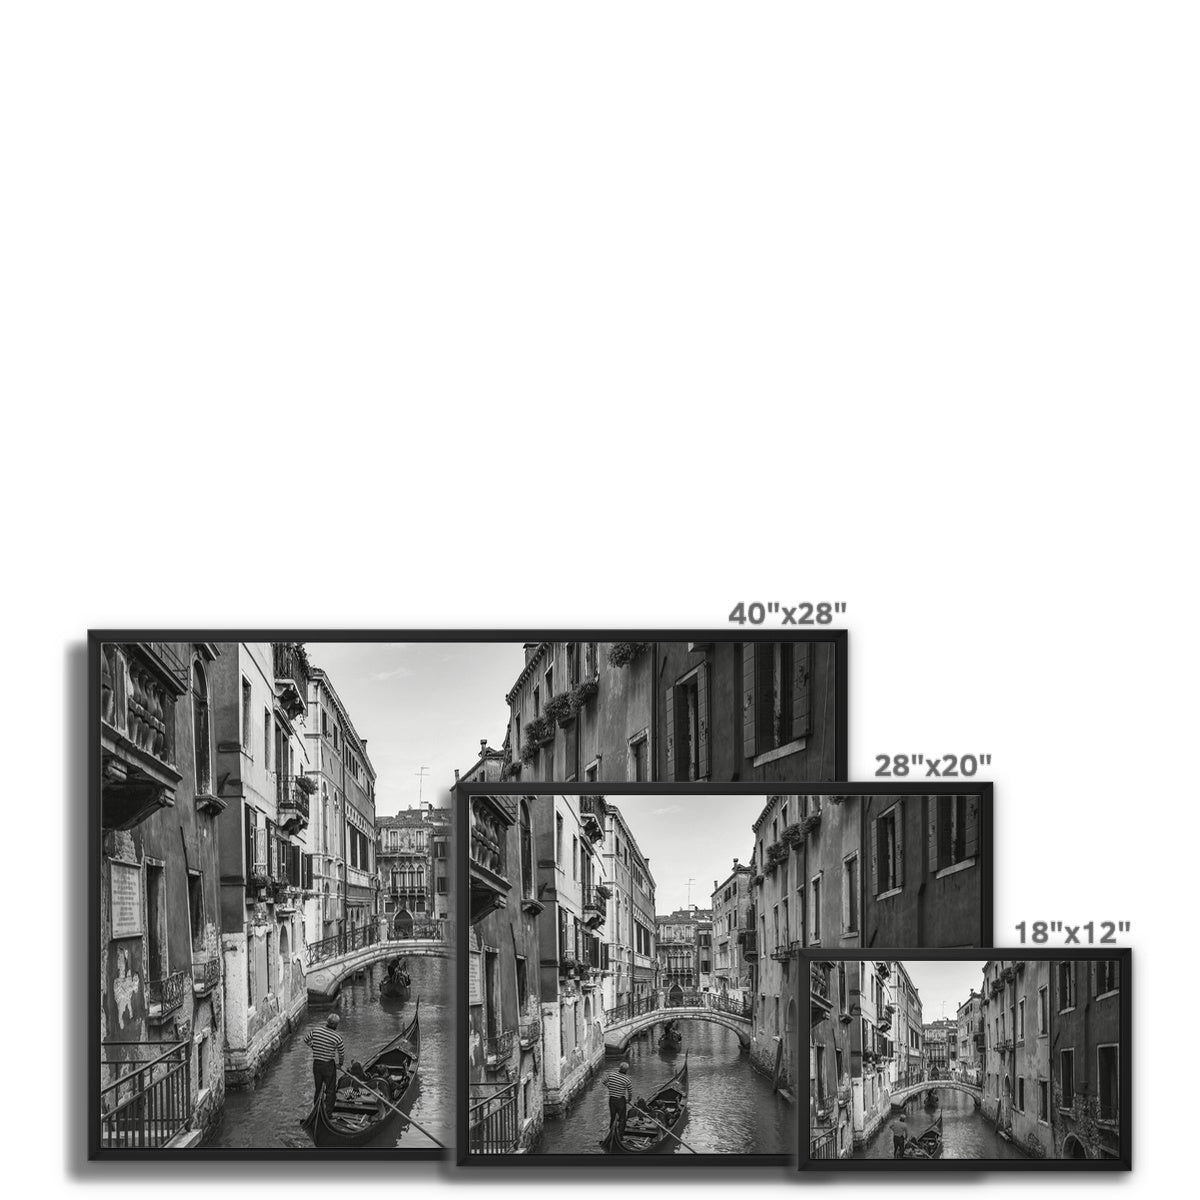 Venice Canals B&W Framed Canvas